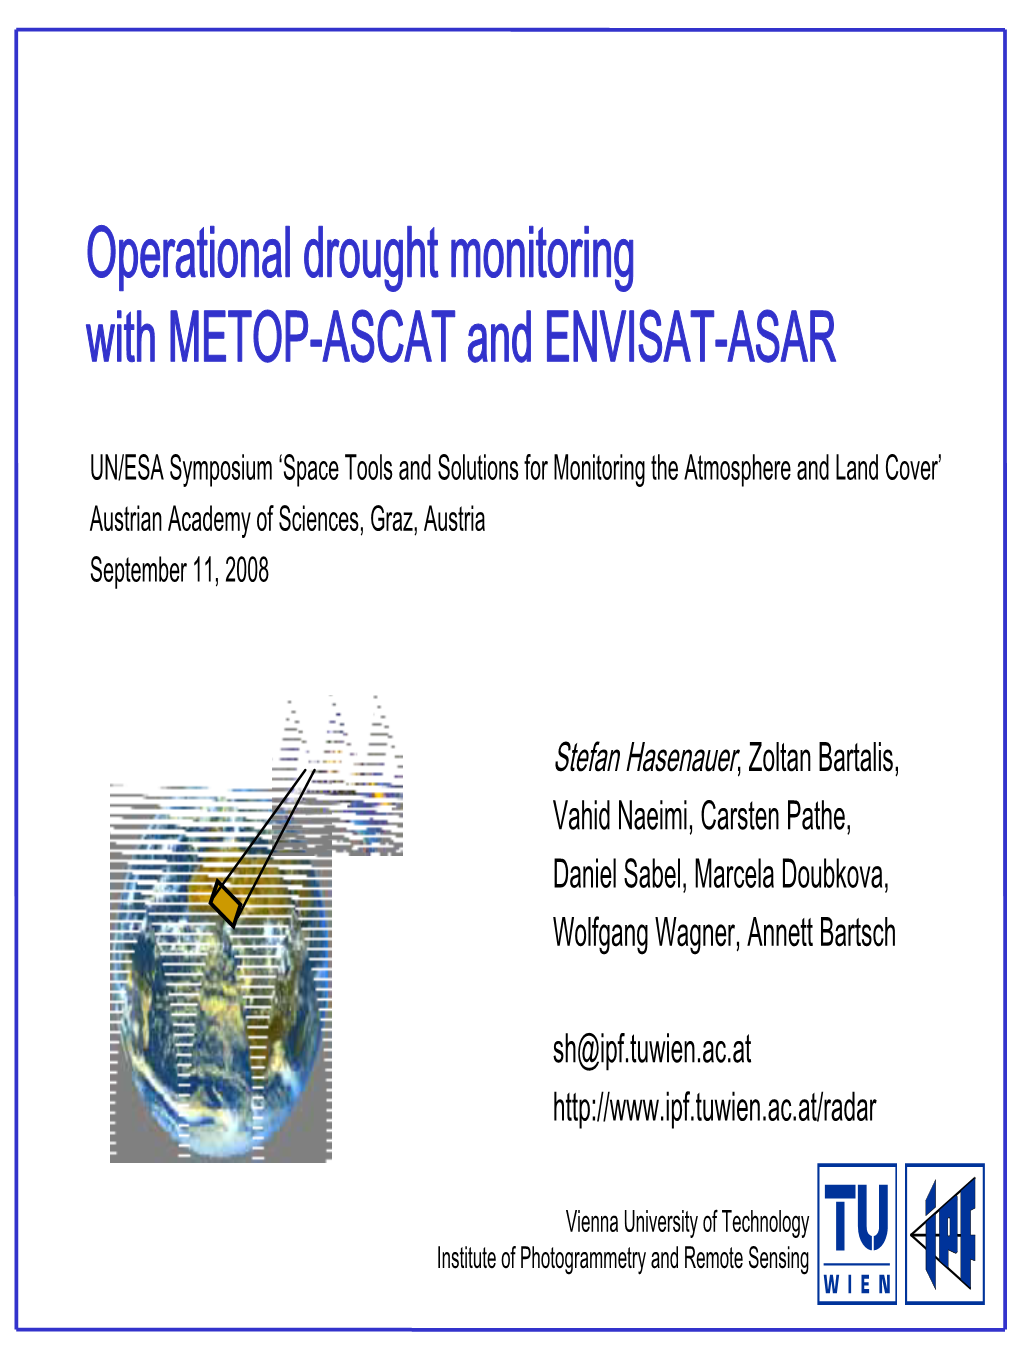 Global Soil Moisture Monitoring with METOP ASCAT and ENVISAT